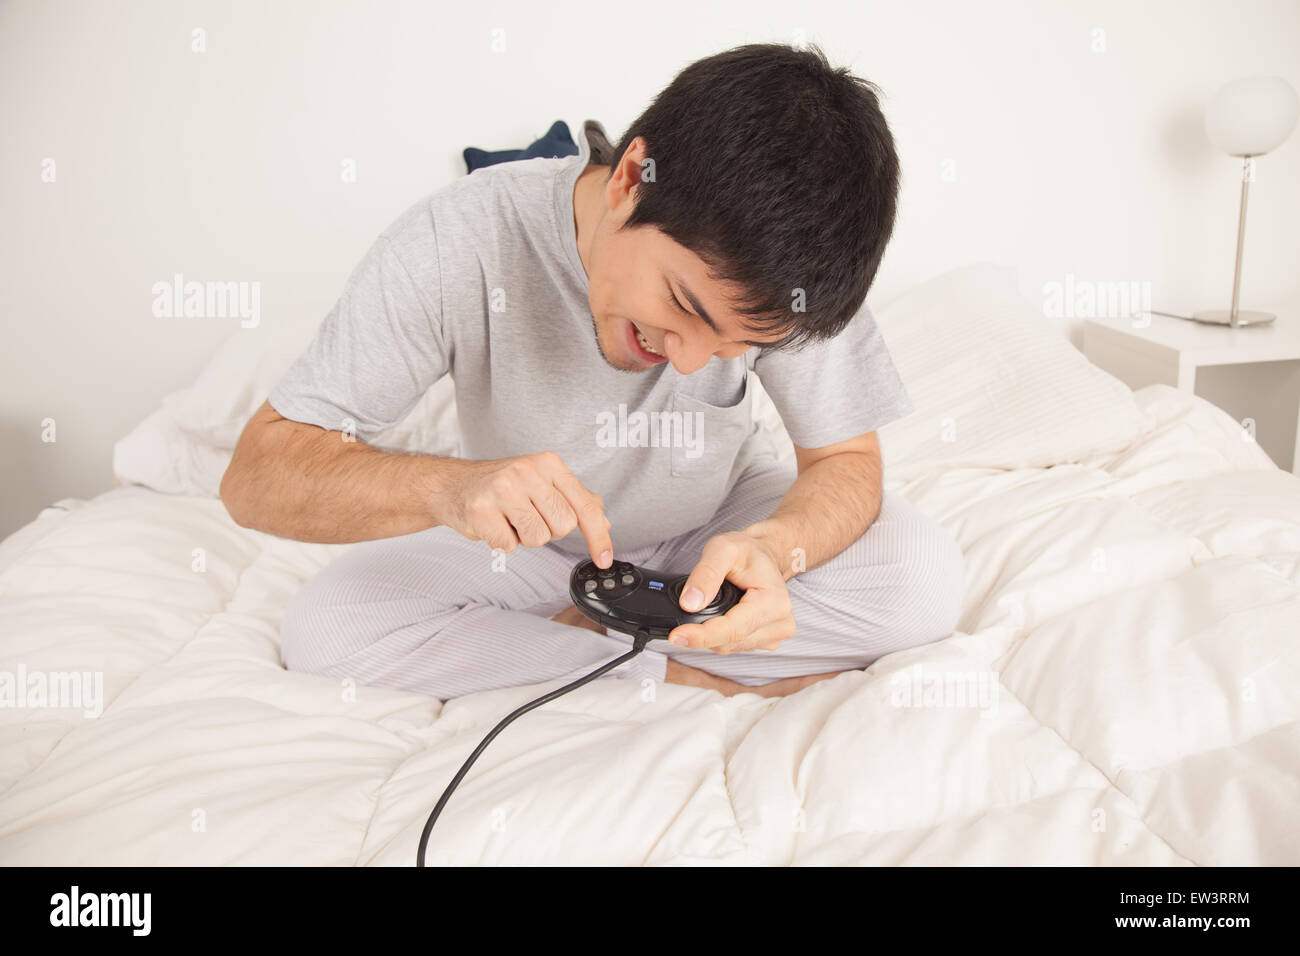 Young man in his bedroom Stock Photo